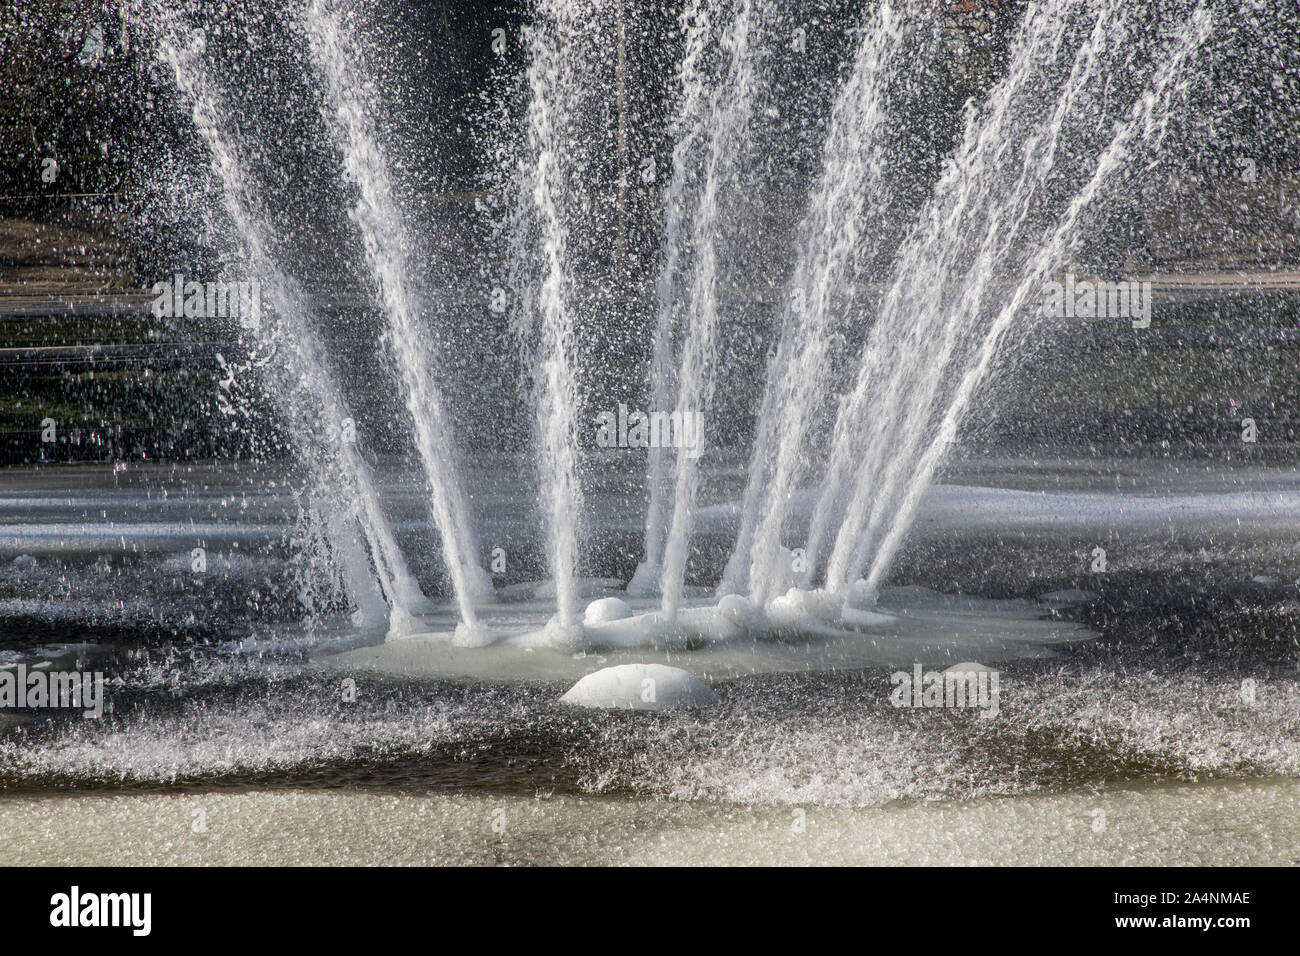 Water fountain, fountain, in winter, the water splashes, despite frost, minus temperatures, the water basin is frozen, Stock Photo